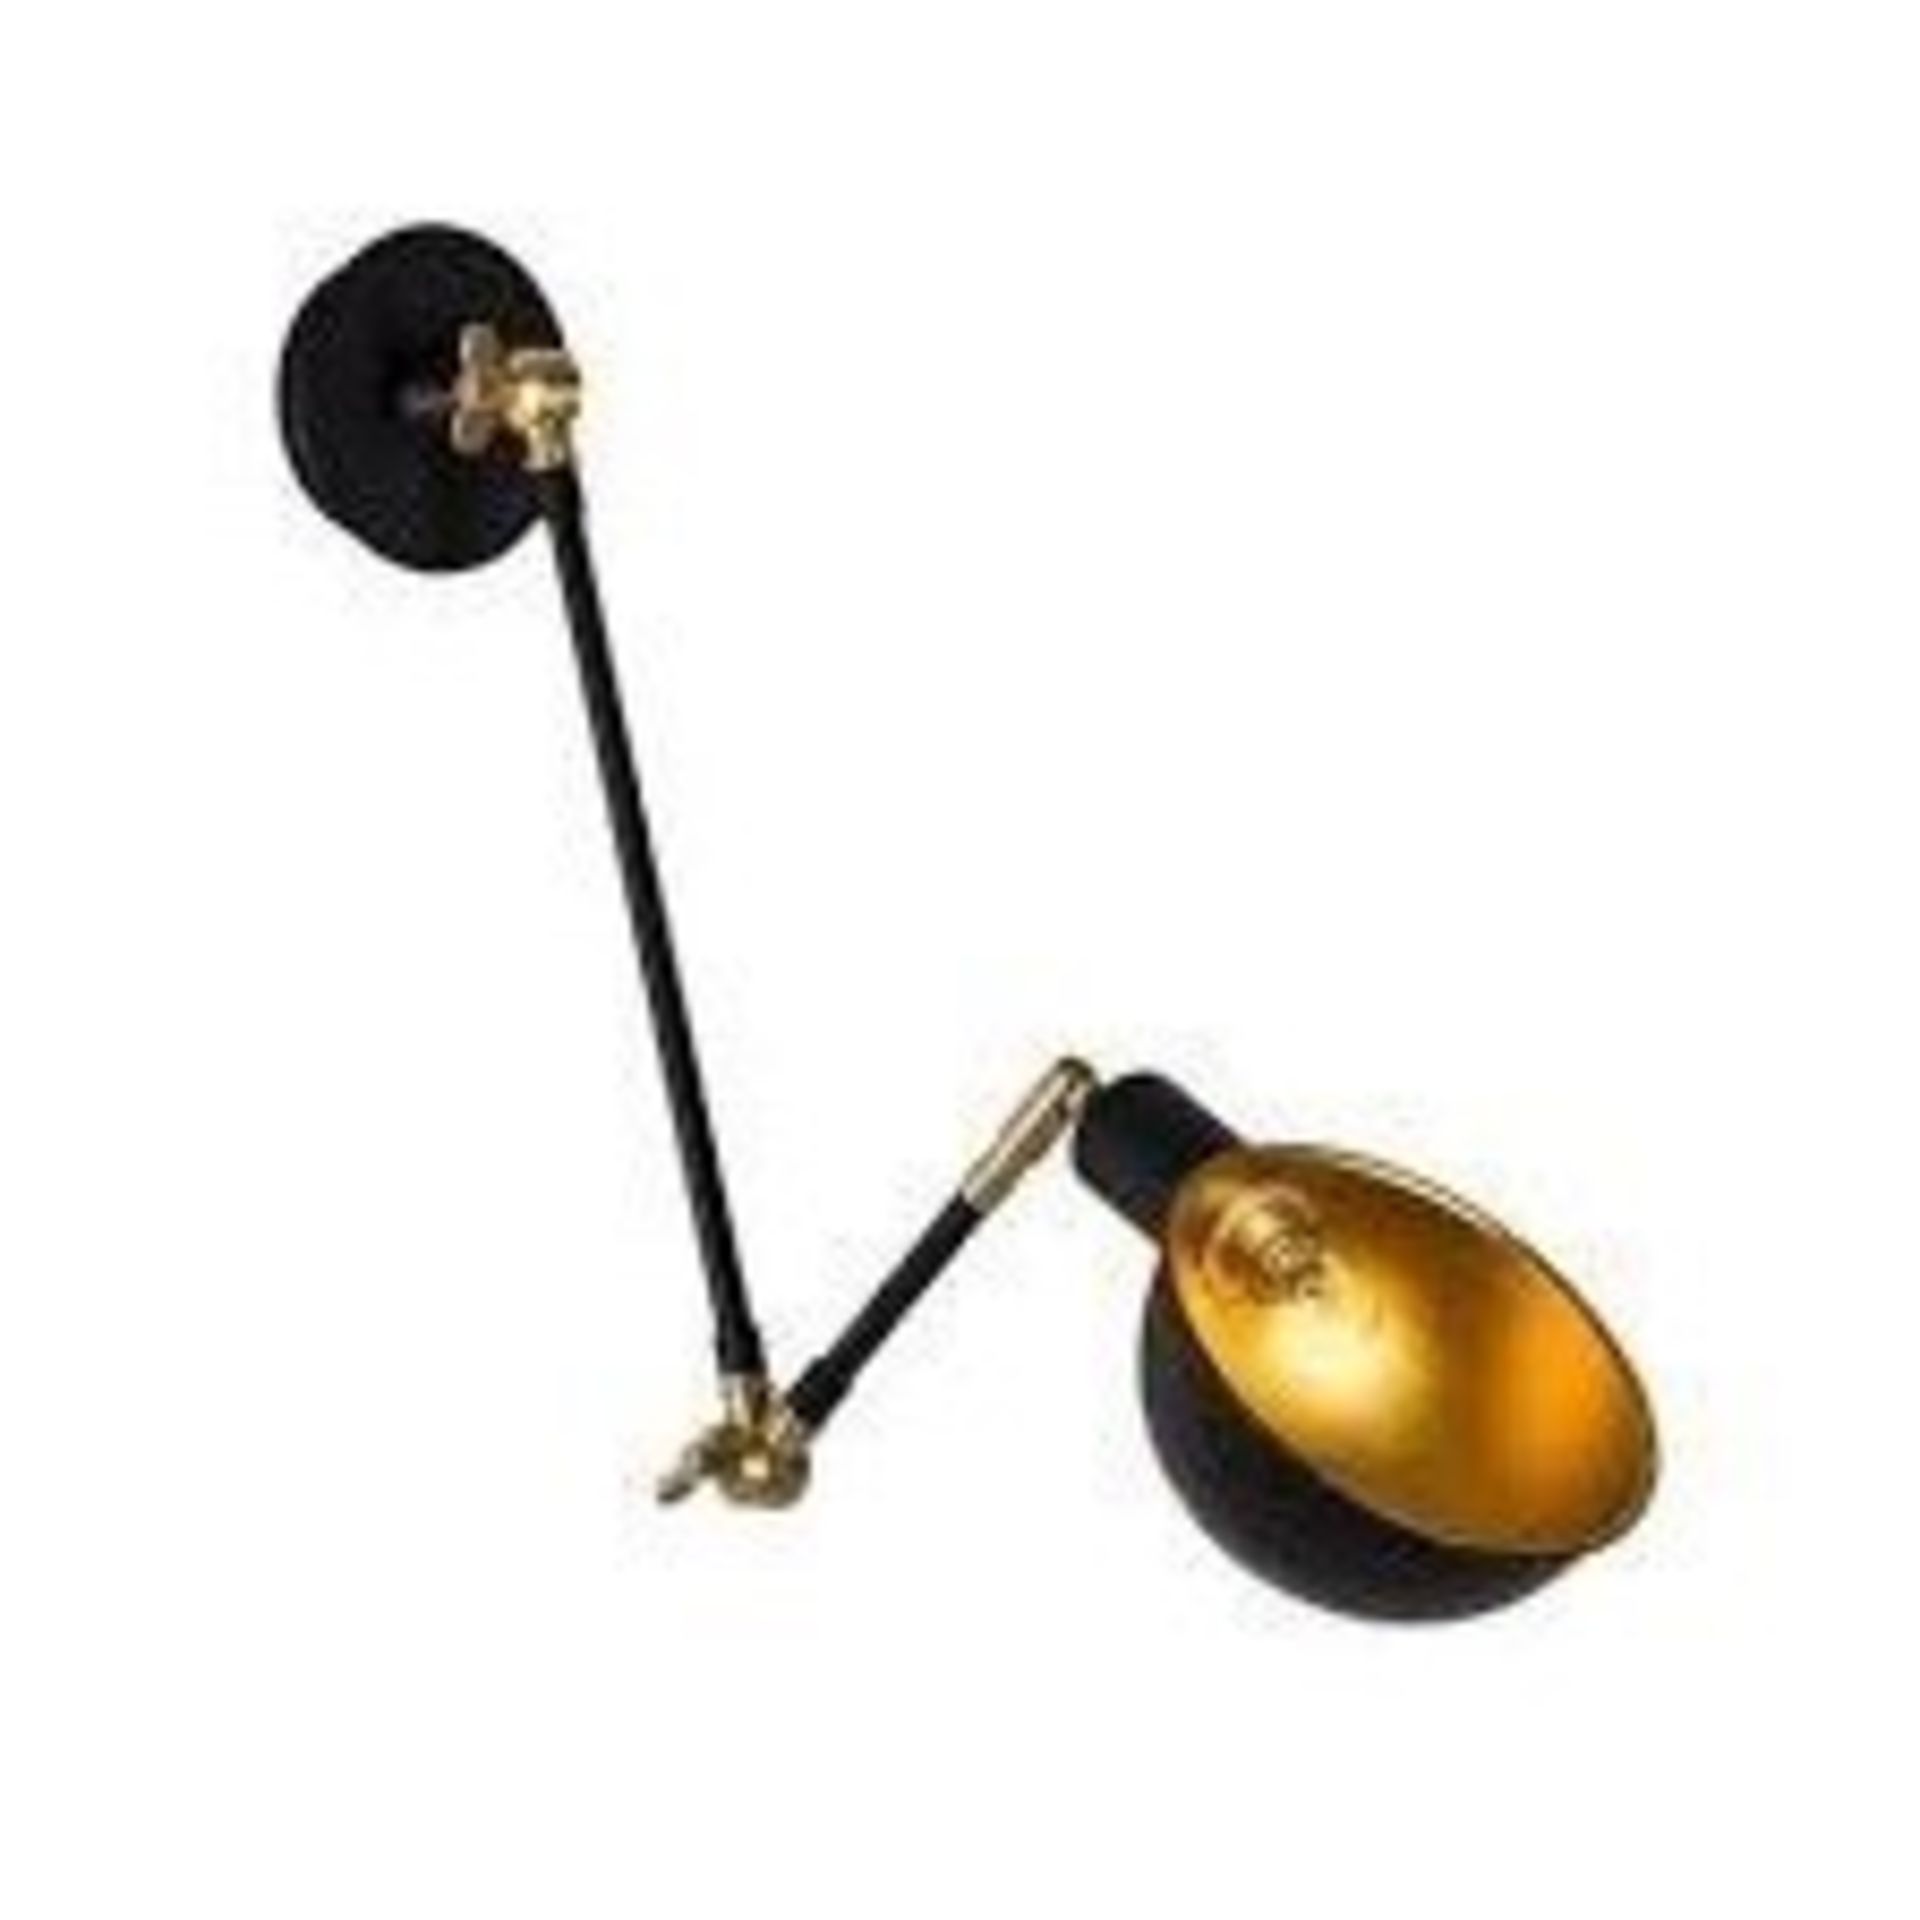 Black and Gold Anthony Halcraft Wall Light RRP £180 (15097) (Public Viewing and Appraisals